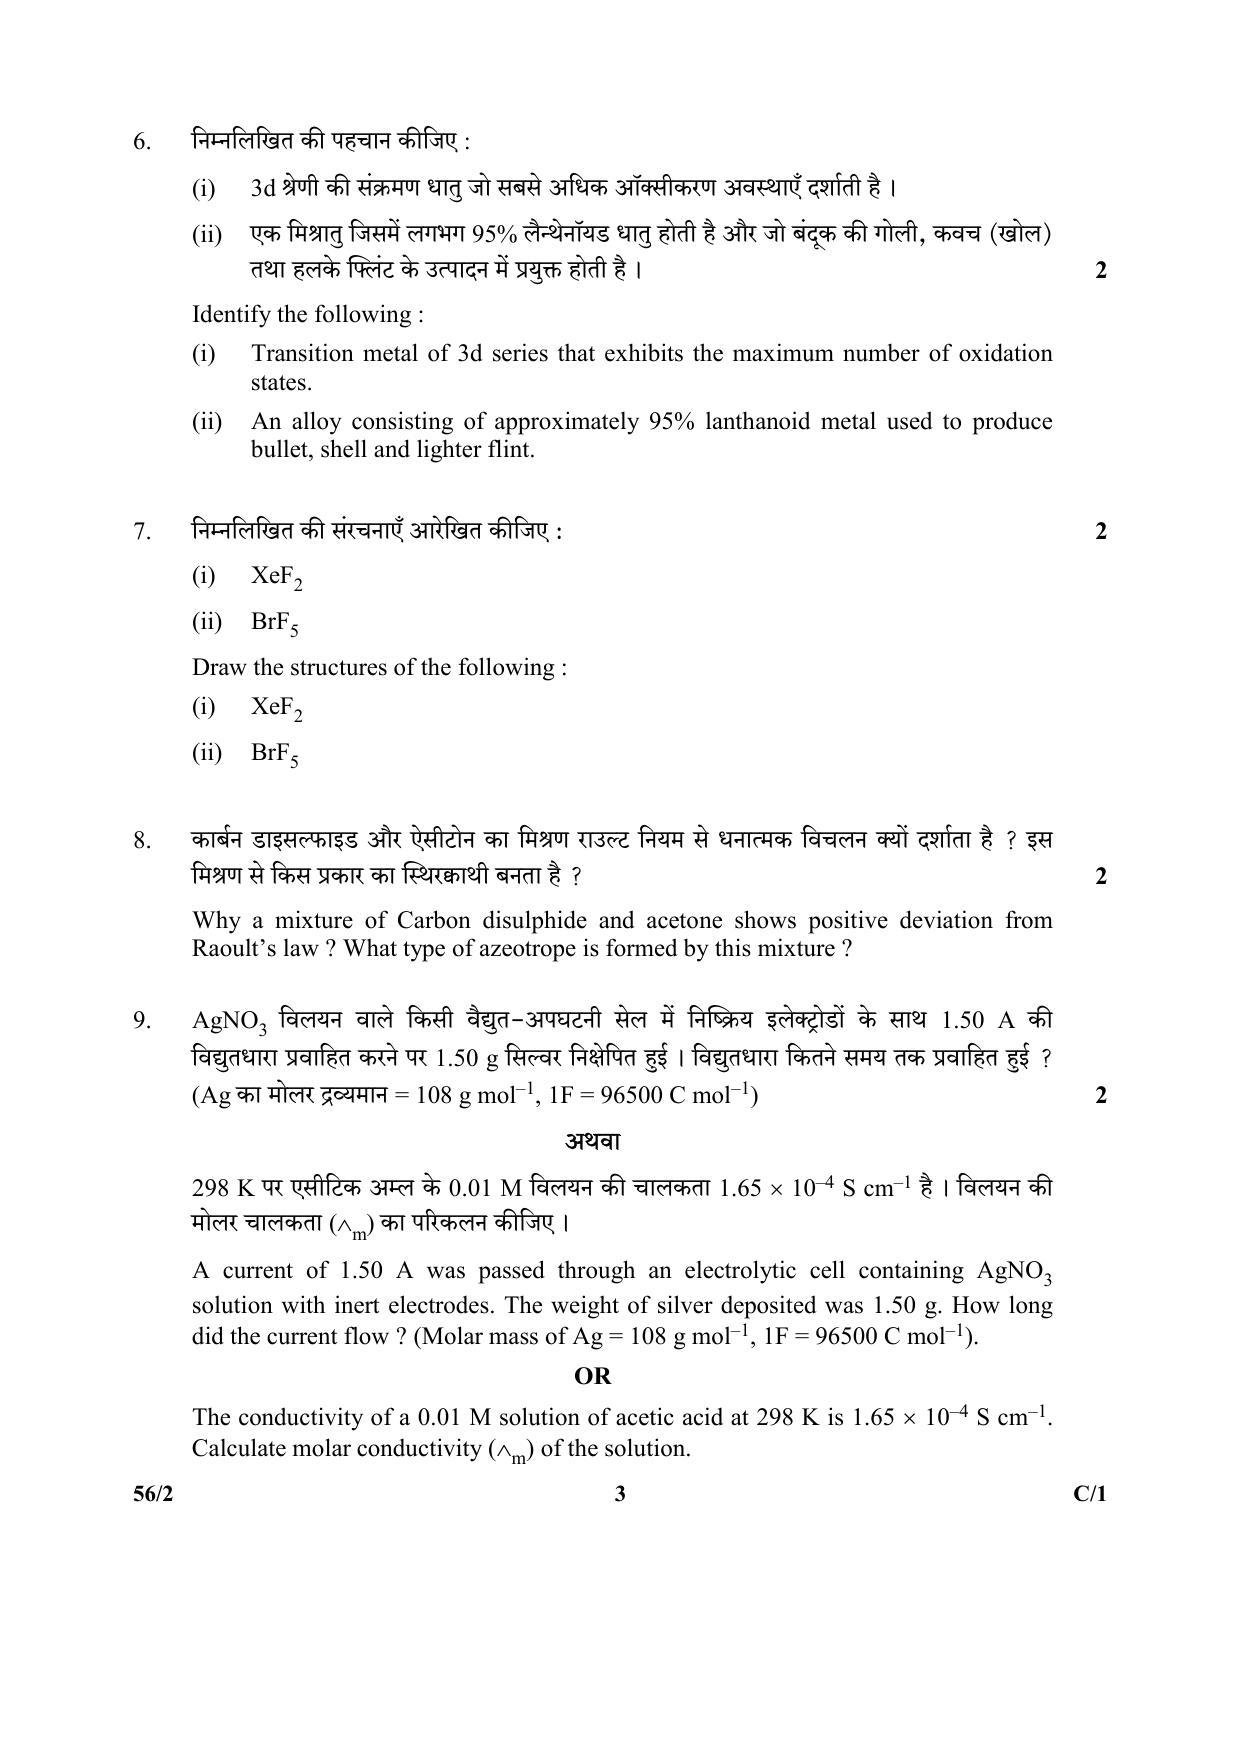 CBSE Class 12 56-2 (Chemistry) 2018 Compartment Question Paper - Page 3